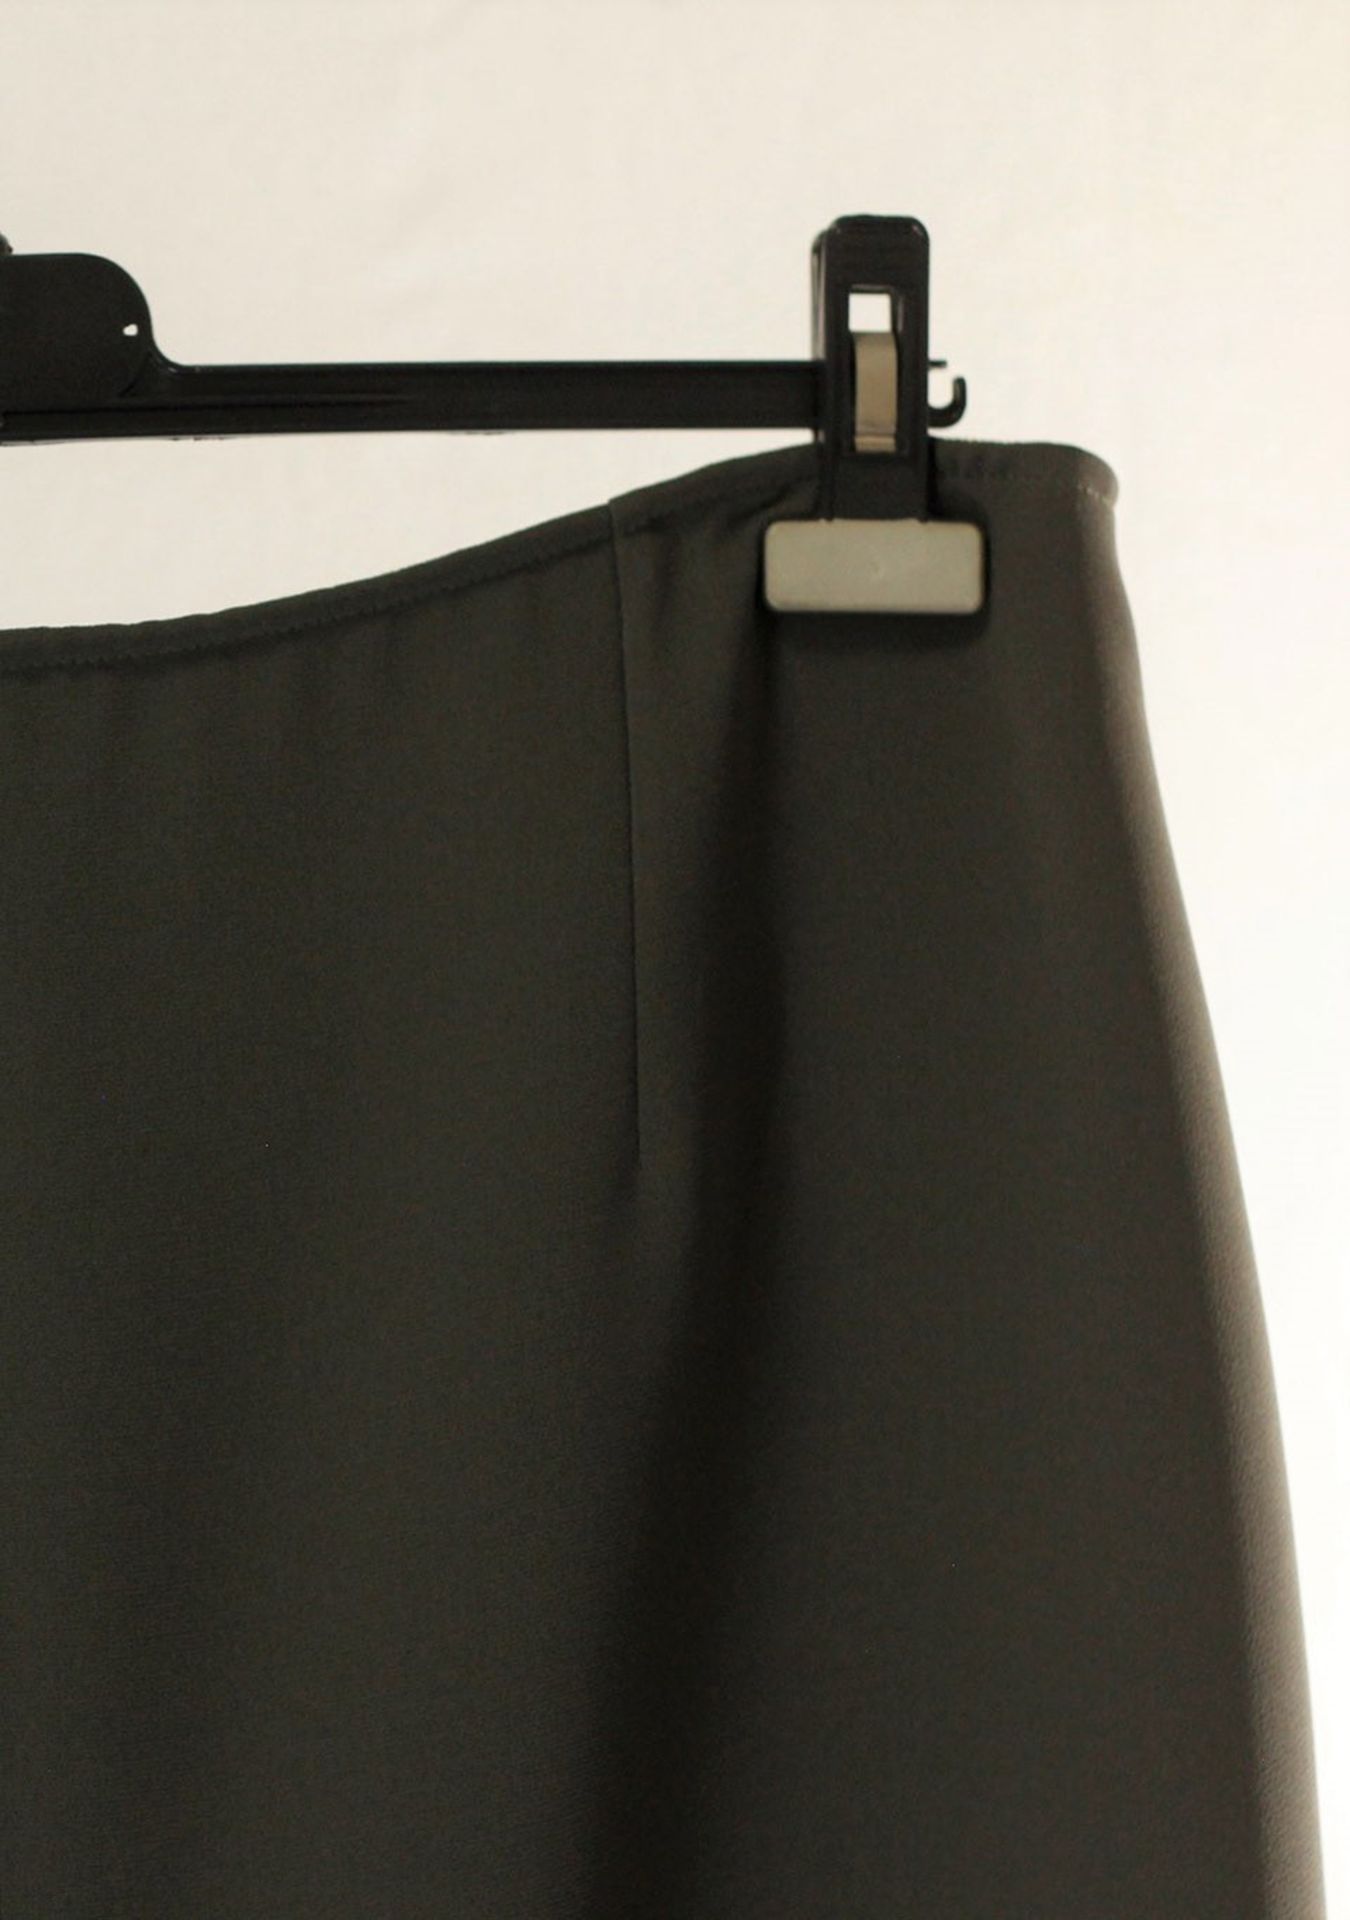 1 x Anne Belin Green Skirt - From A High End Clothing Boutique In The Netherlands - Image 4 of 8